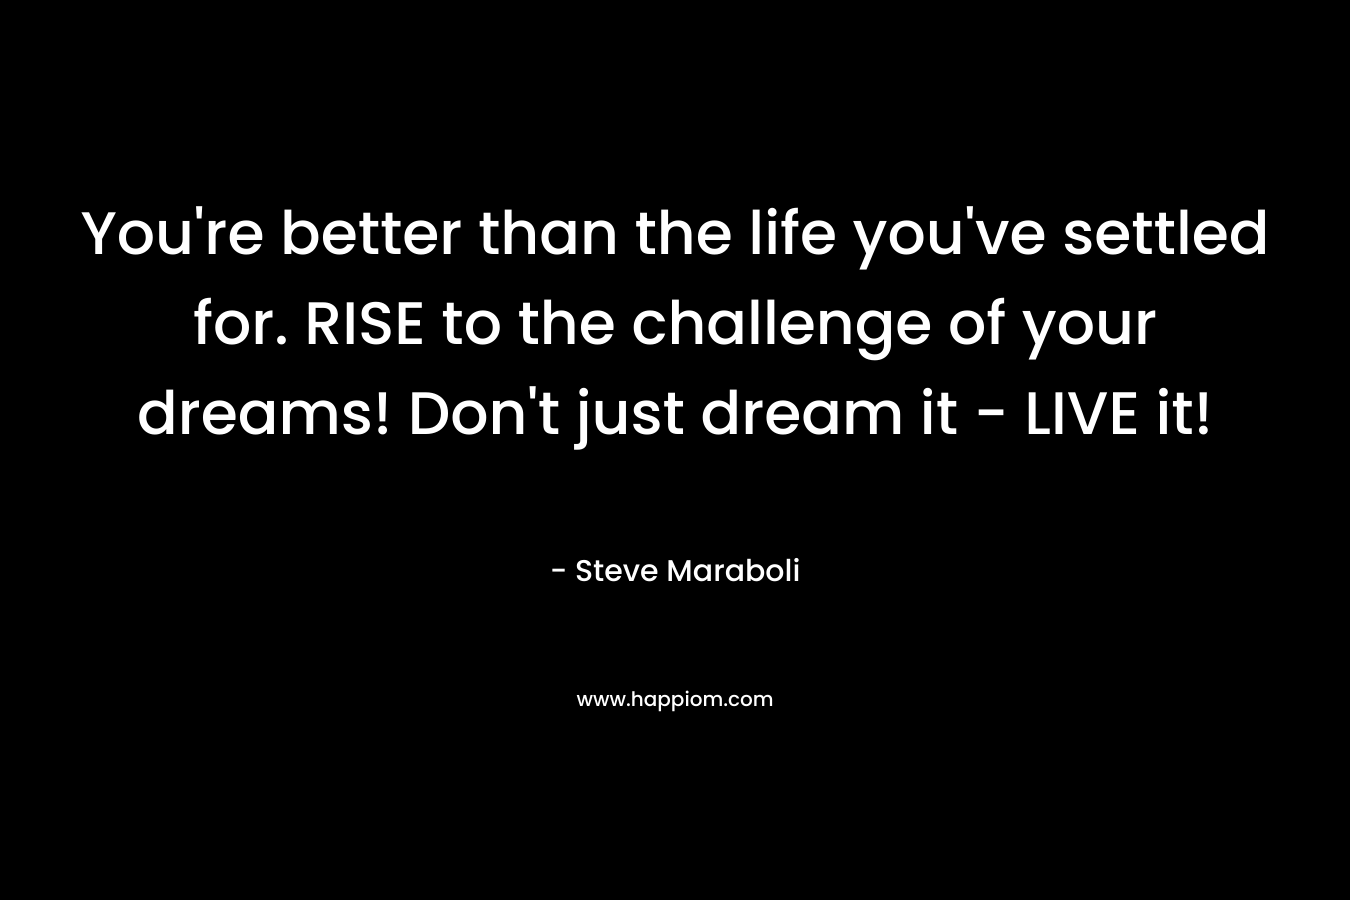 You’re better than the life you’ve settled for. RISE to the challenge of your dreams! Don’t just dream it – LIVE it! – Steve Maraboli